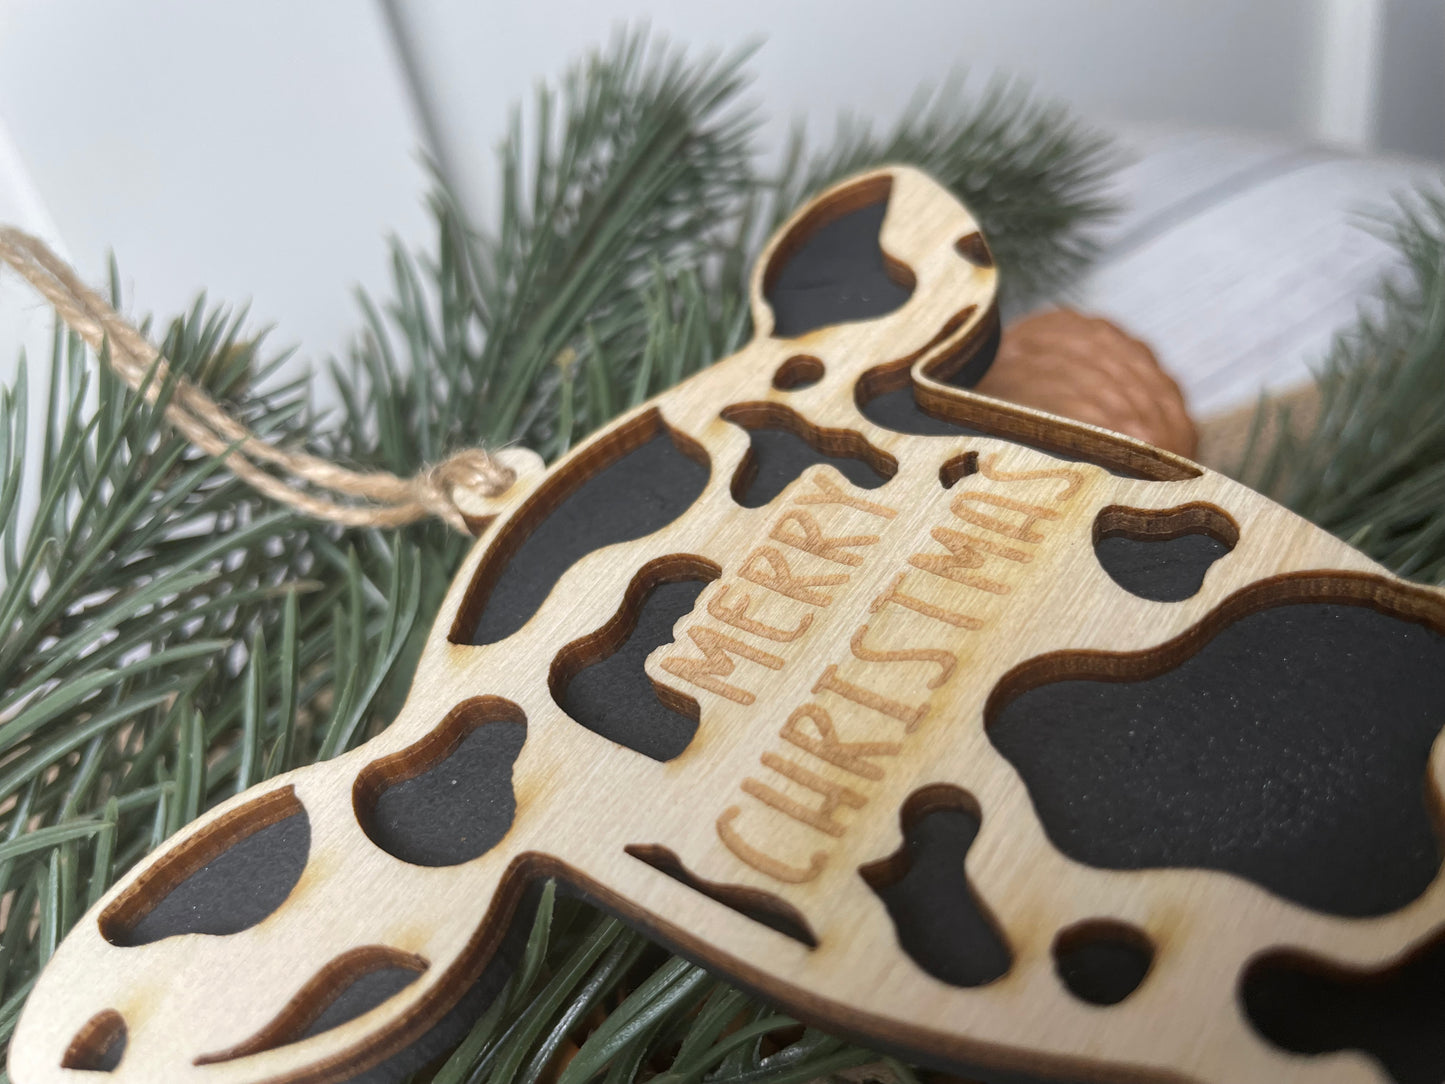 Merry Christmas Cow Ornament